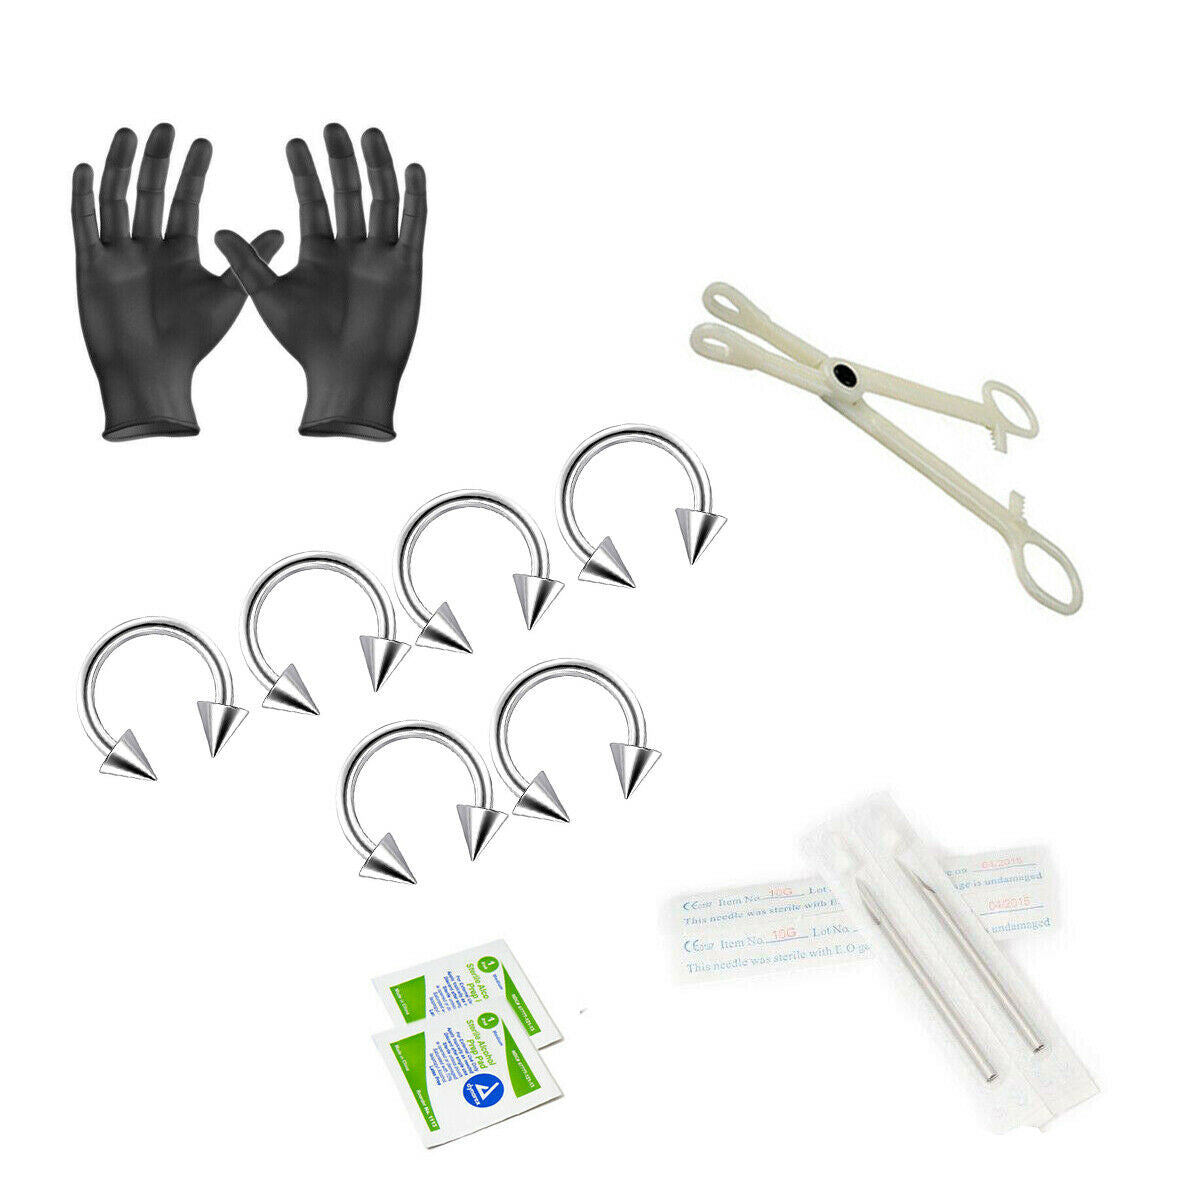 12-Piece Ear Piercing Kit - Includes (6) 14g Earrings, (2) Needles, (1) Forceps, (2) Alcohol Wipes and a Pair of Gloves